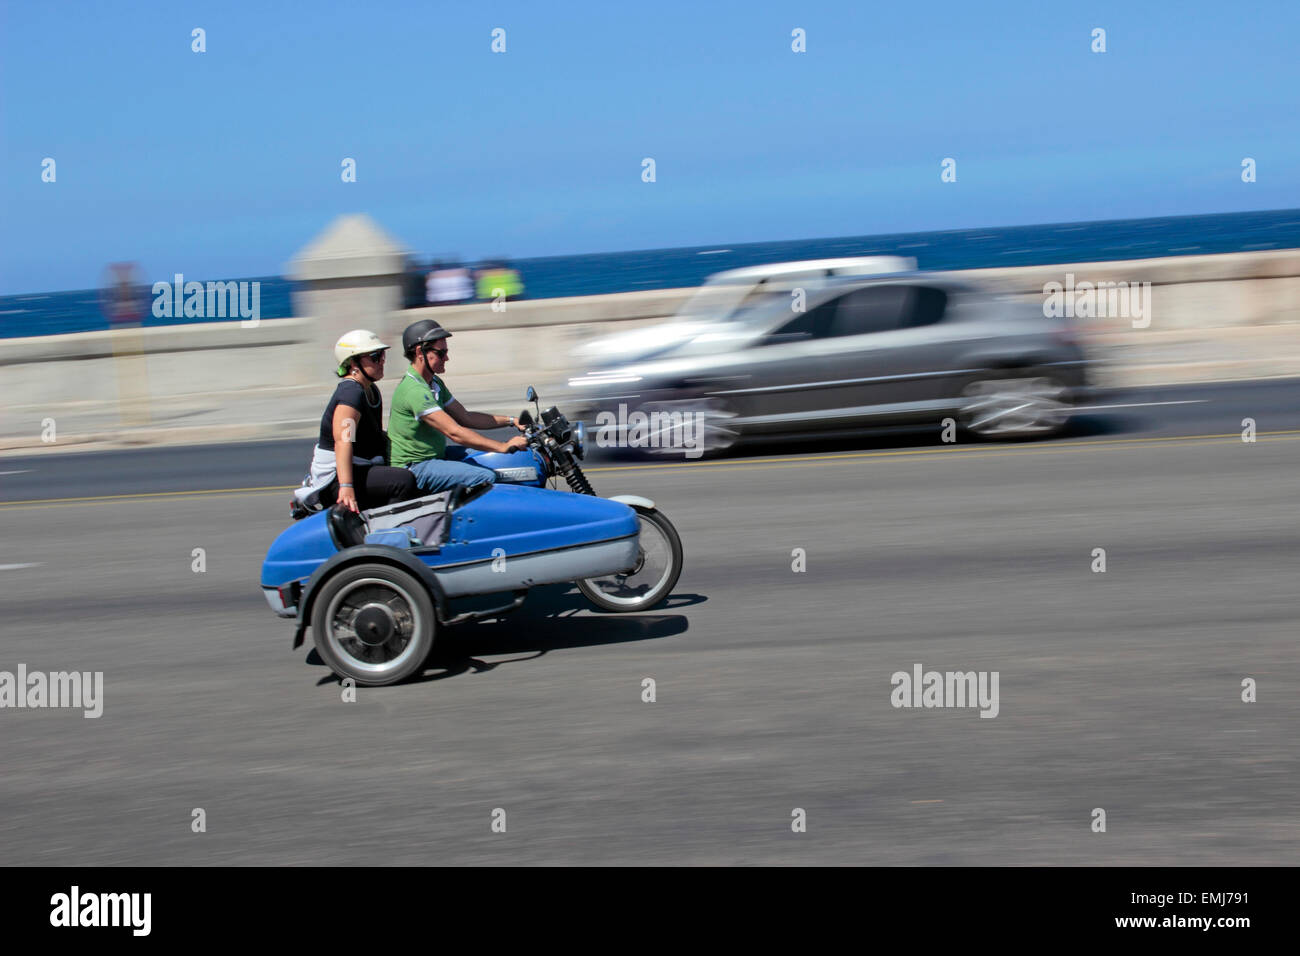 Motorcycle with sidecar a common means of transportation along the Malecon in Havana Cuba Stock Photo